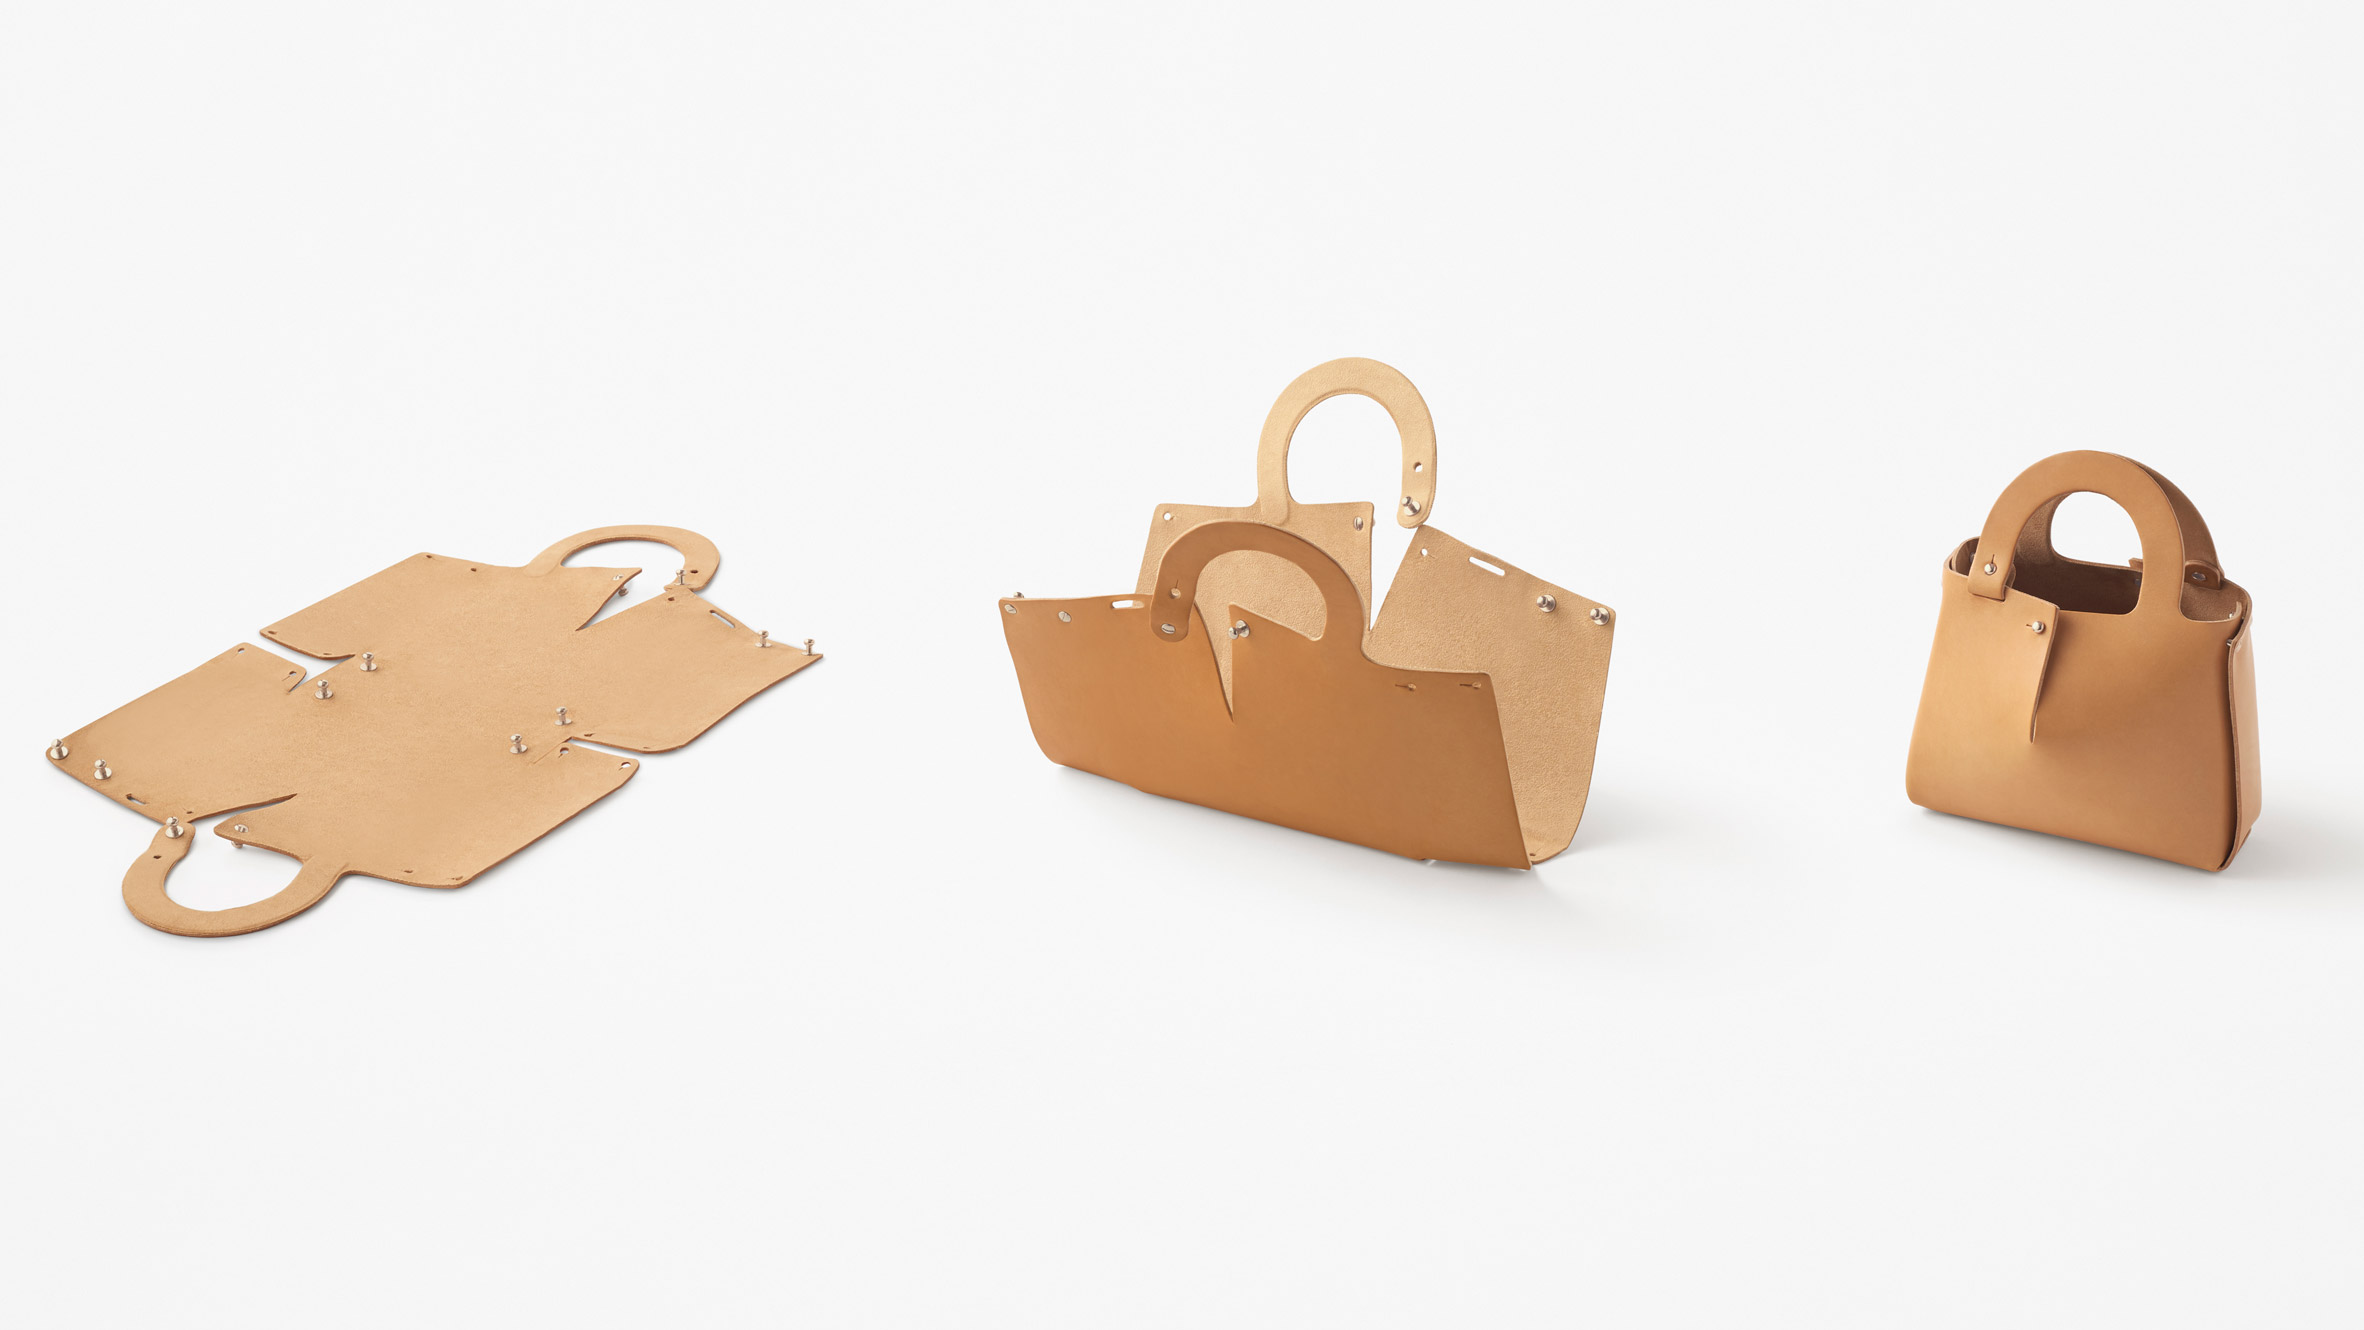 Nendo designs Mai bag from single sheet of laser-cut leather